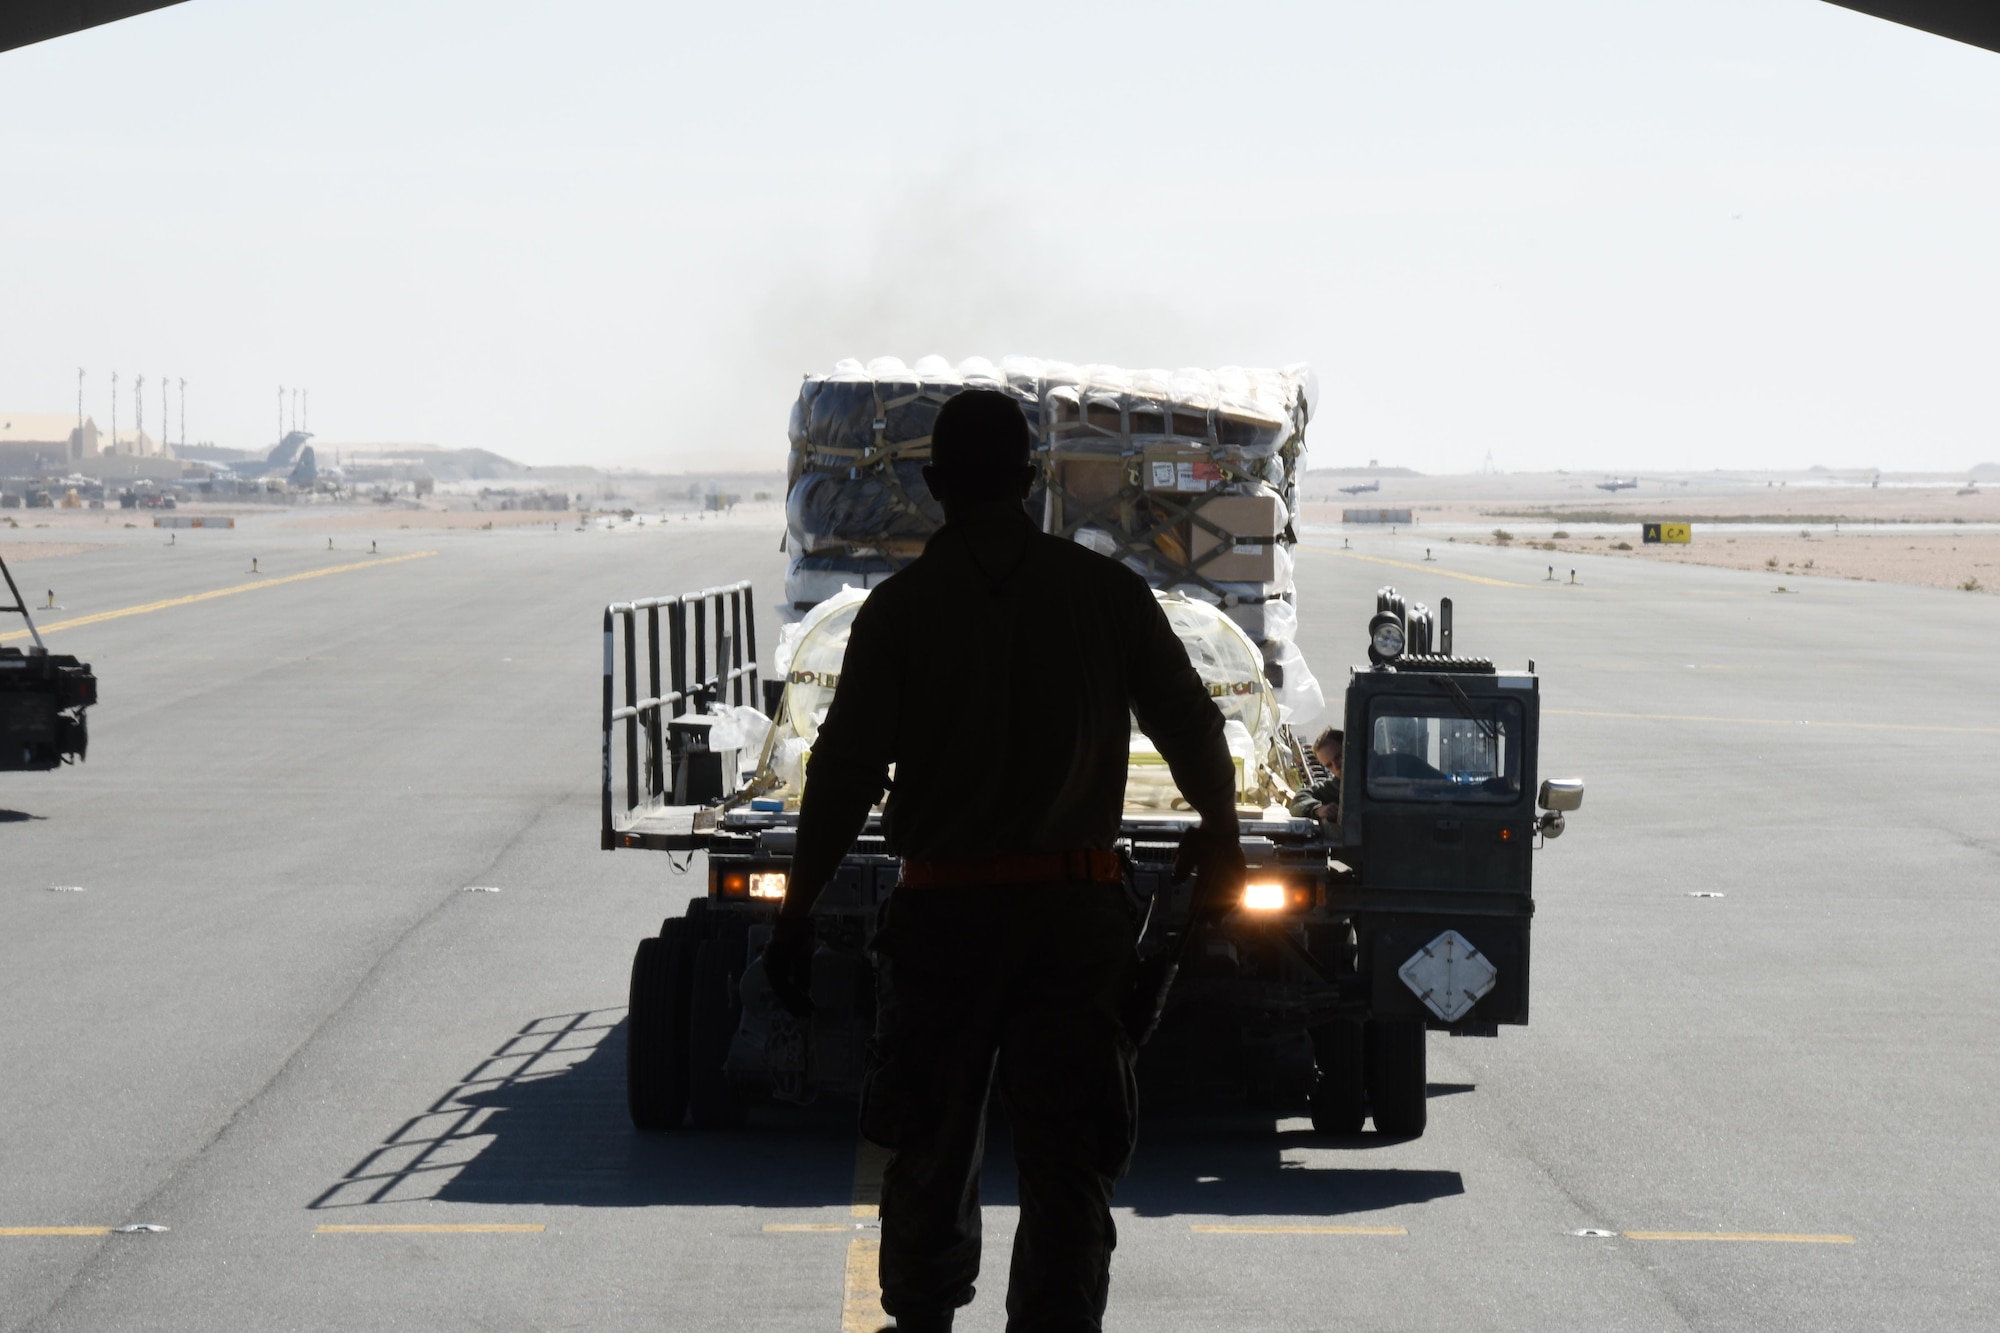 A U.S. Air Force Airman with the 8th Expeditionary Air Mobility Squadron guides an Airman driving a Tunner 60K cargo loader at Al Udeid Air Base, Qatar, Dec. 12, 2016. The 8th EAMS expertise in transportation and logistics enable them to inspect, temporarily store and load cargo such as munitions, blood, special operations cargo, hazardous materials, vehicles and medical supplies. (U.S. Air Force photo by Senior Airman Cynthia A. Innocenti)